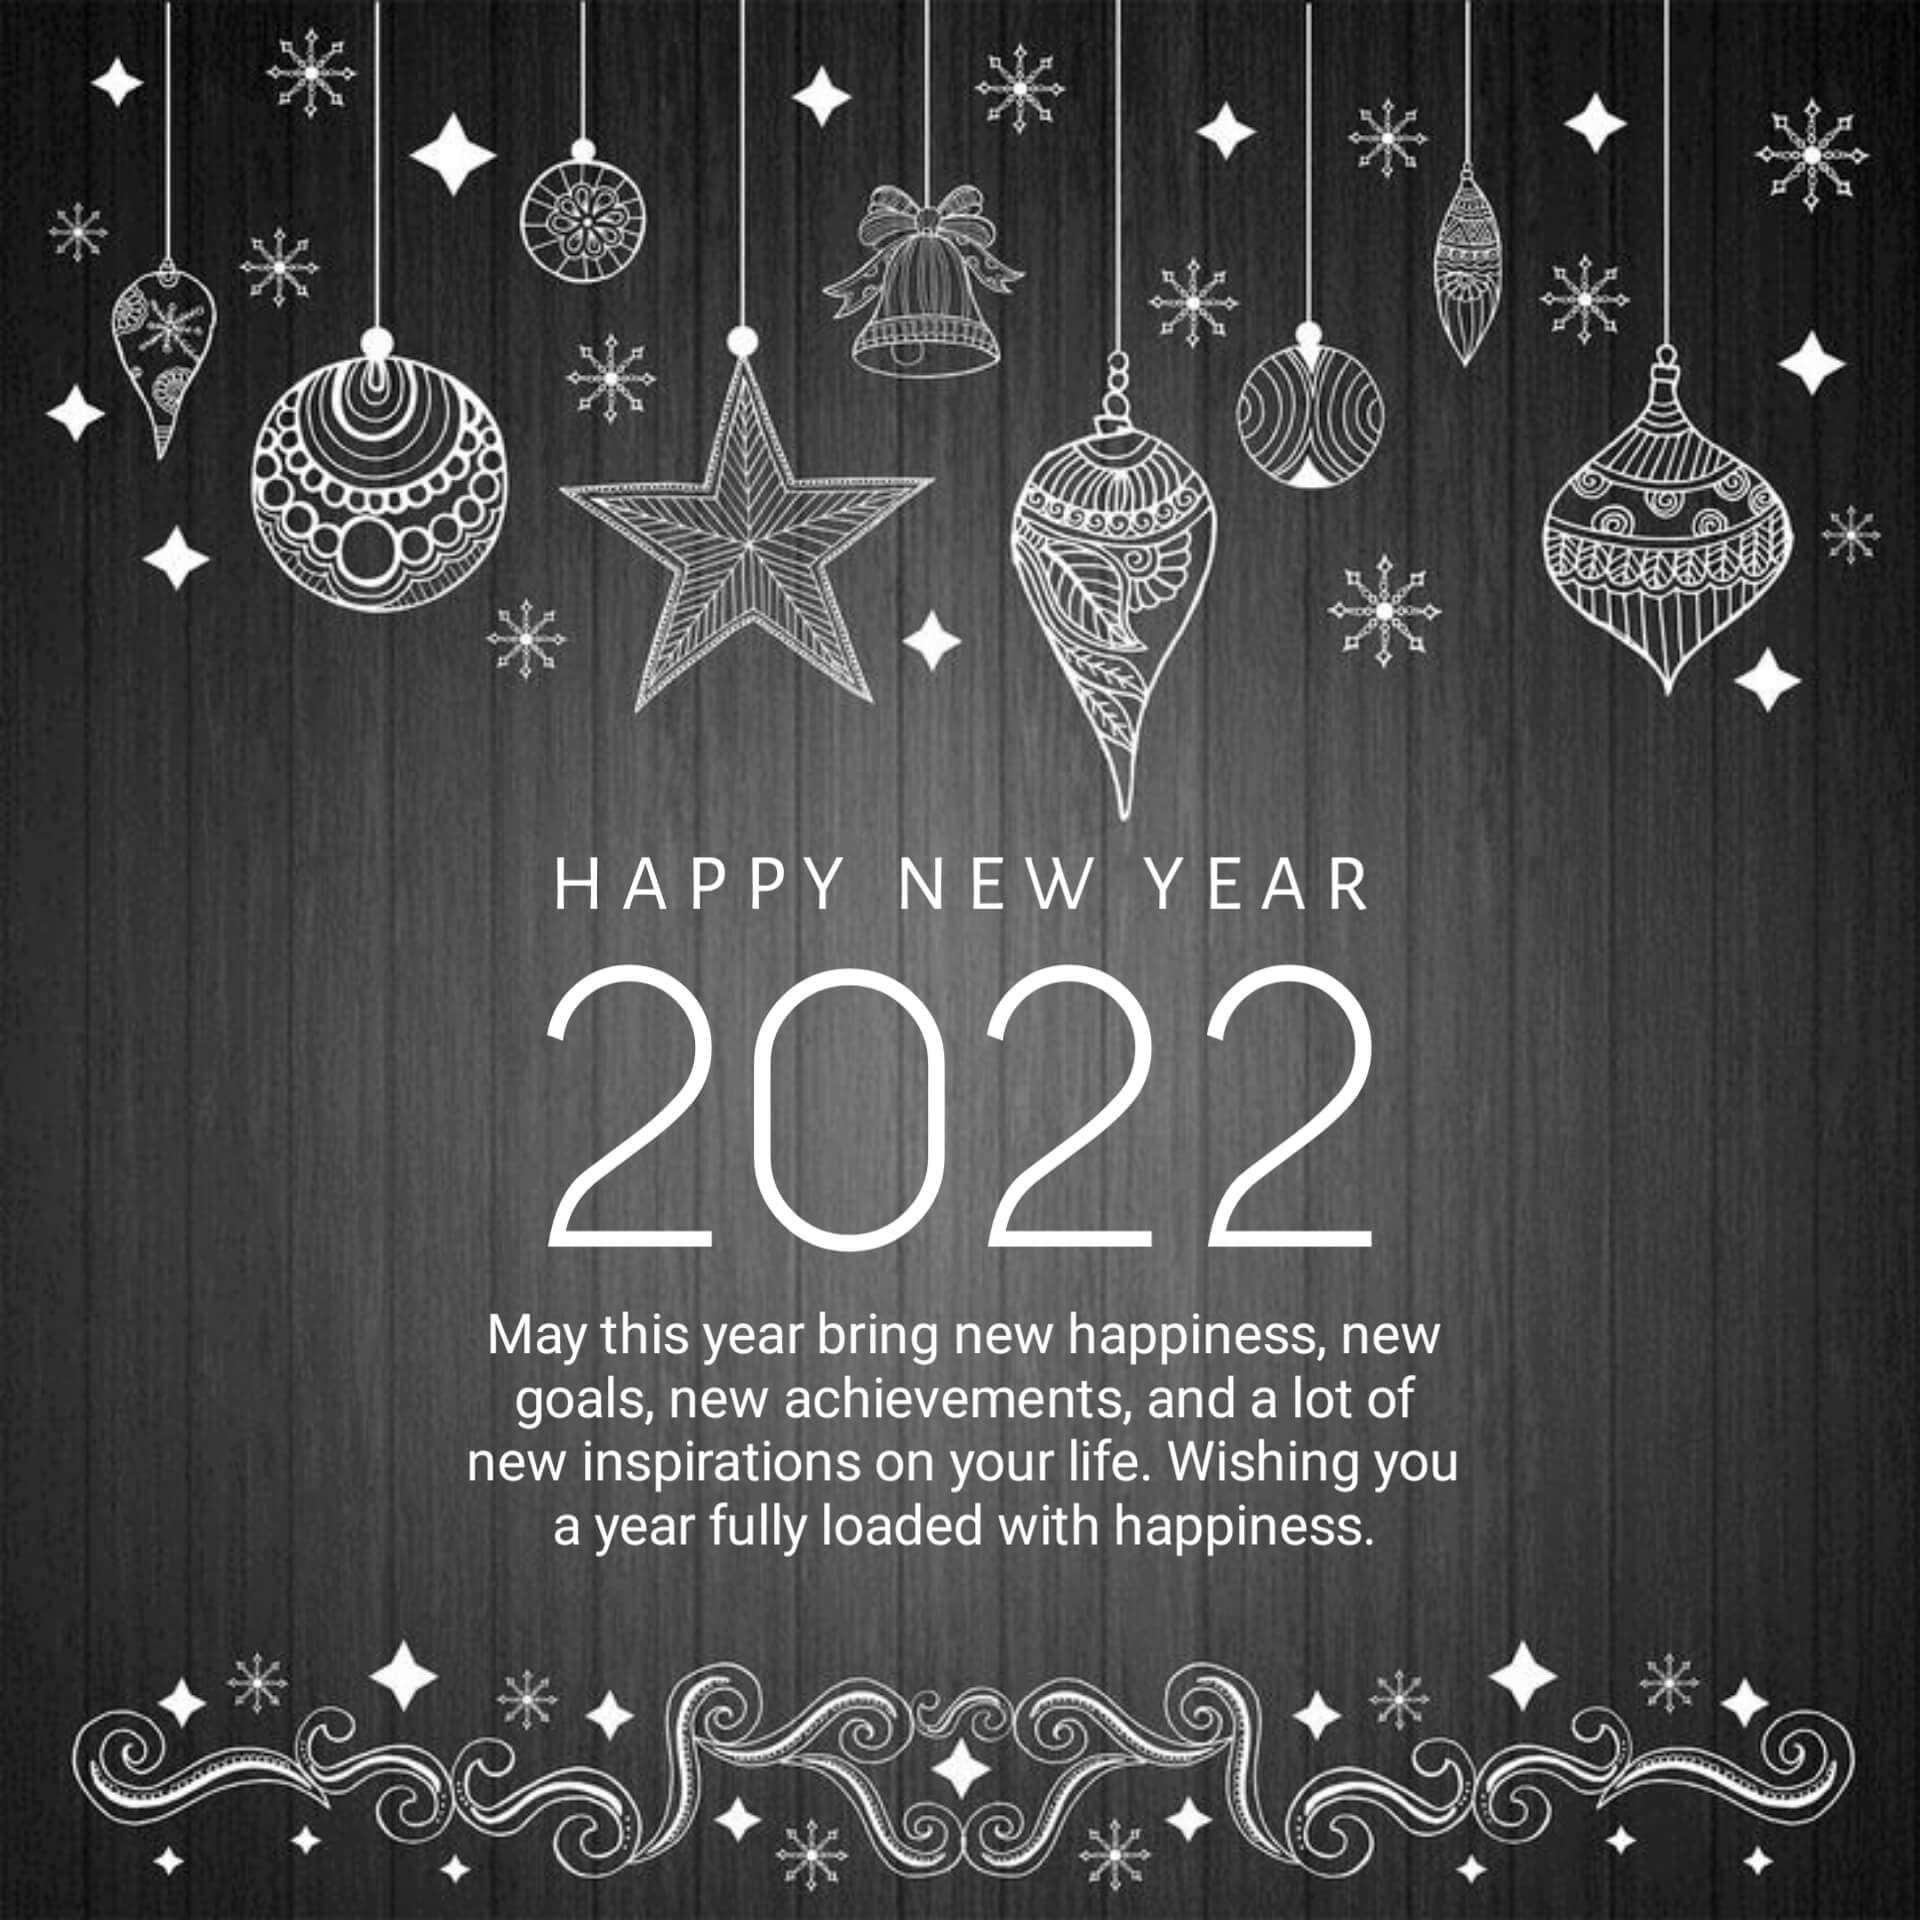 Happy New Year Wishes Image